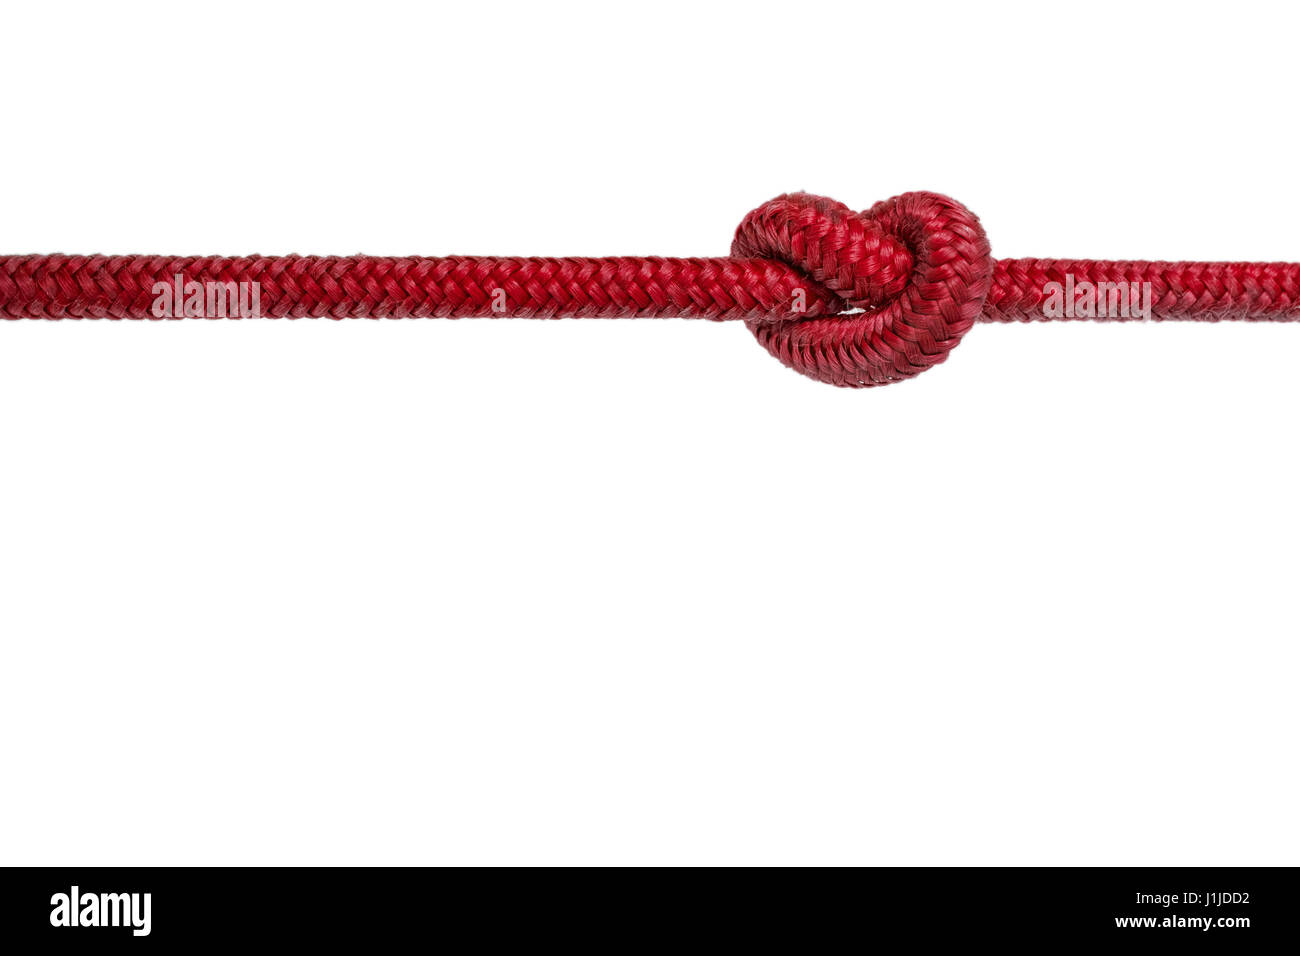 https://c8.alamy.com/comp/J1JDD2/red-rope-with-knot-knotted-rope-on-white-background-J1JDD2.jpg